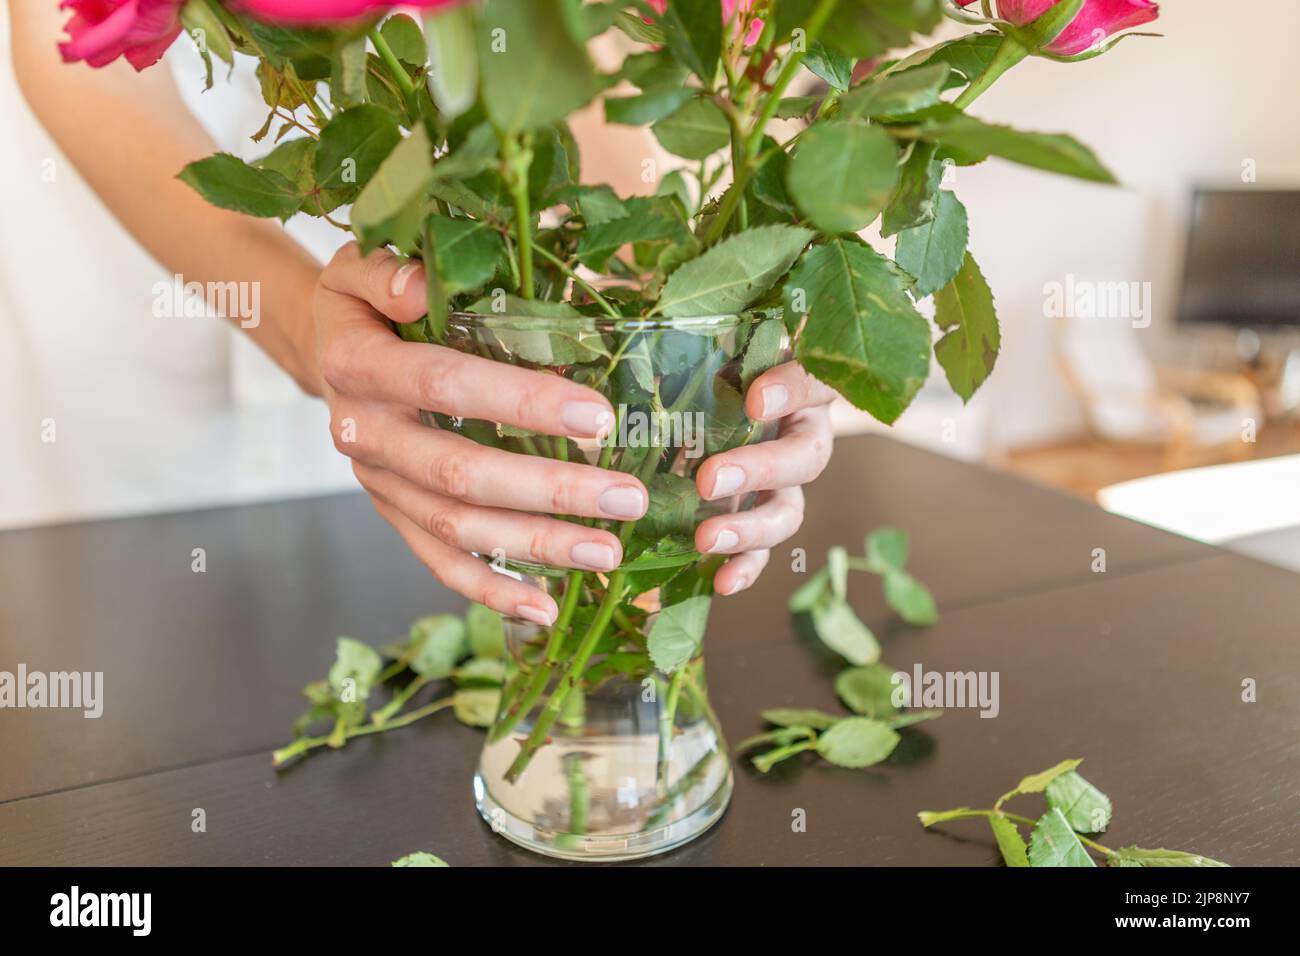 Woman hands holding a vase with roses. Stock Photo